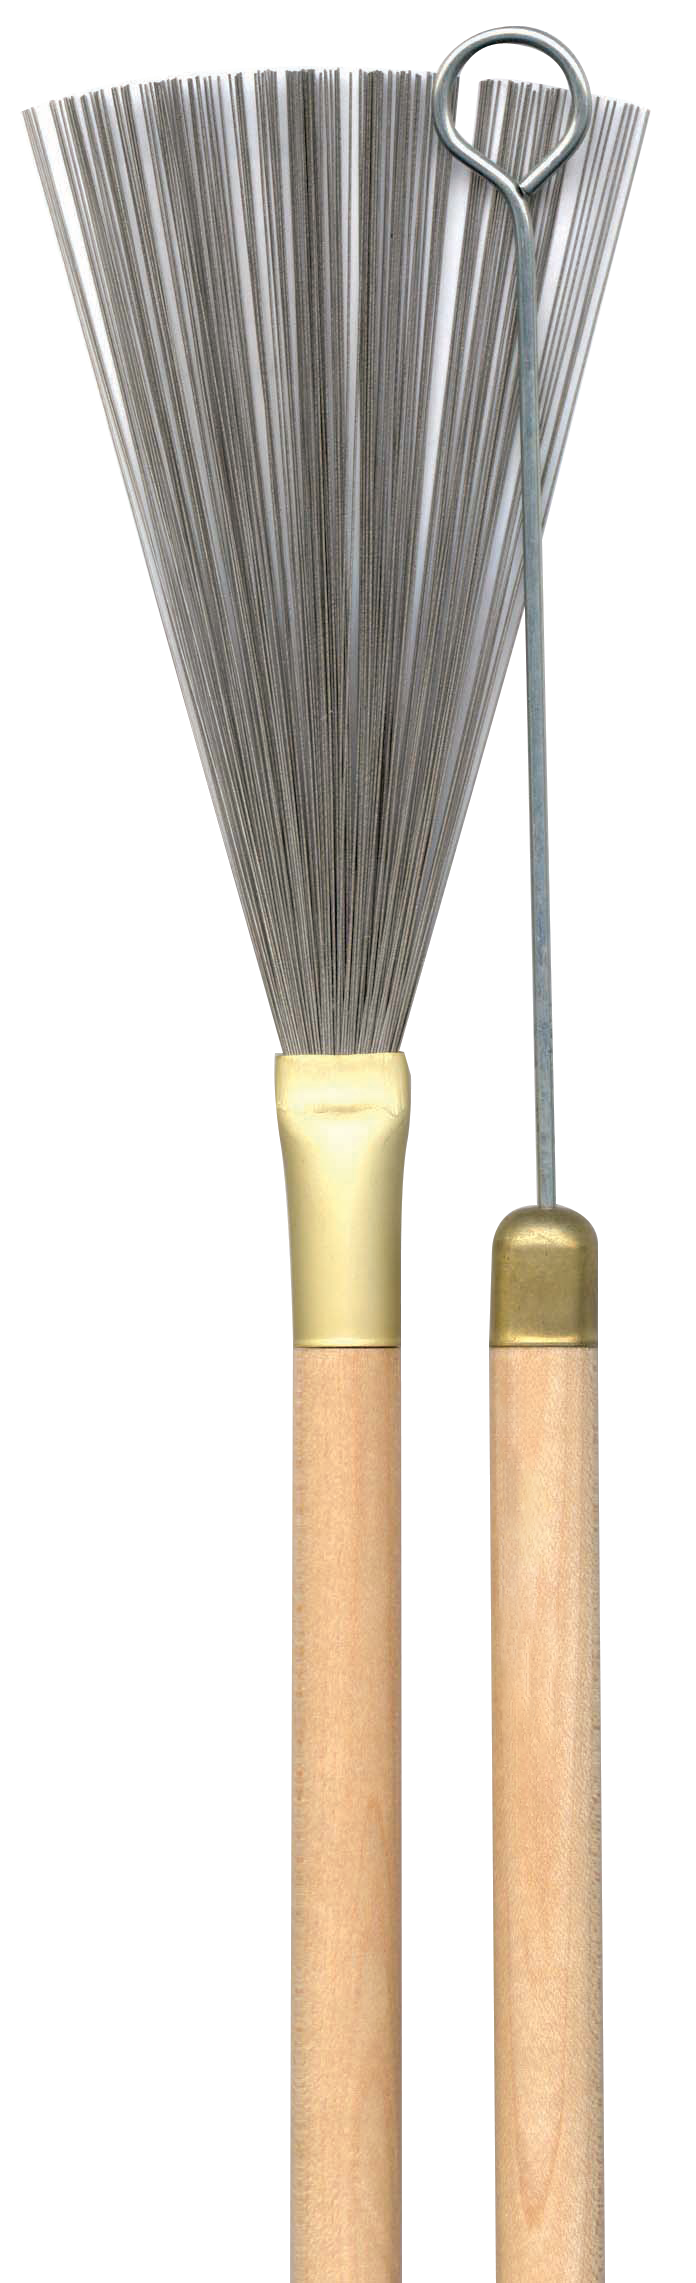 CPK Wire Brushes, Wooden Handle